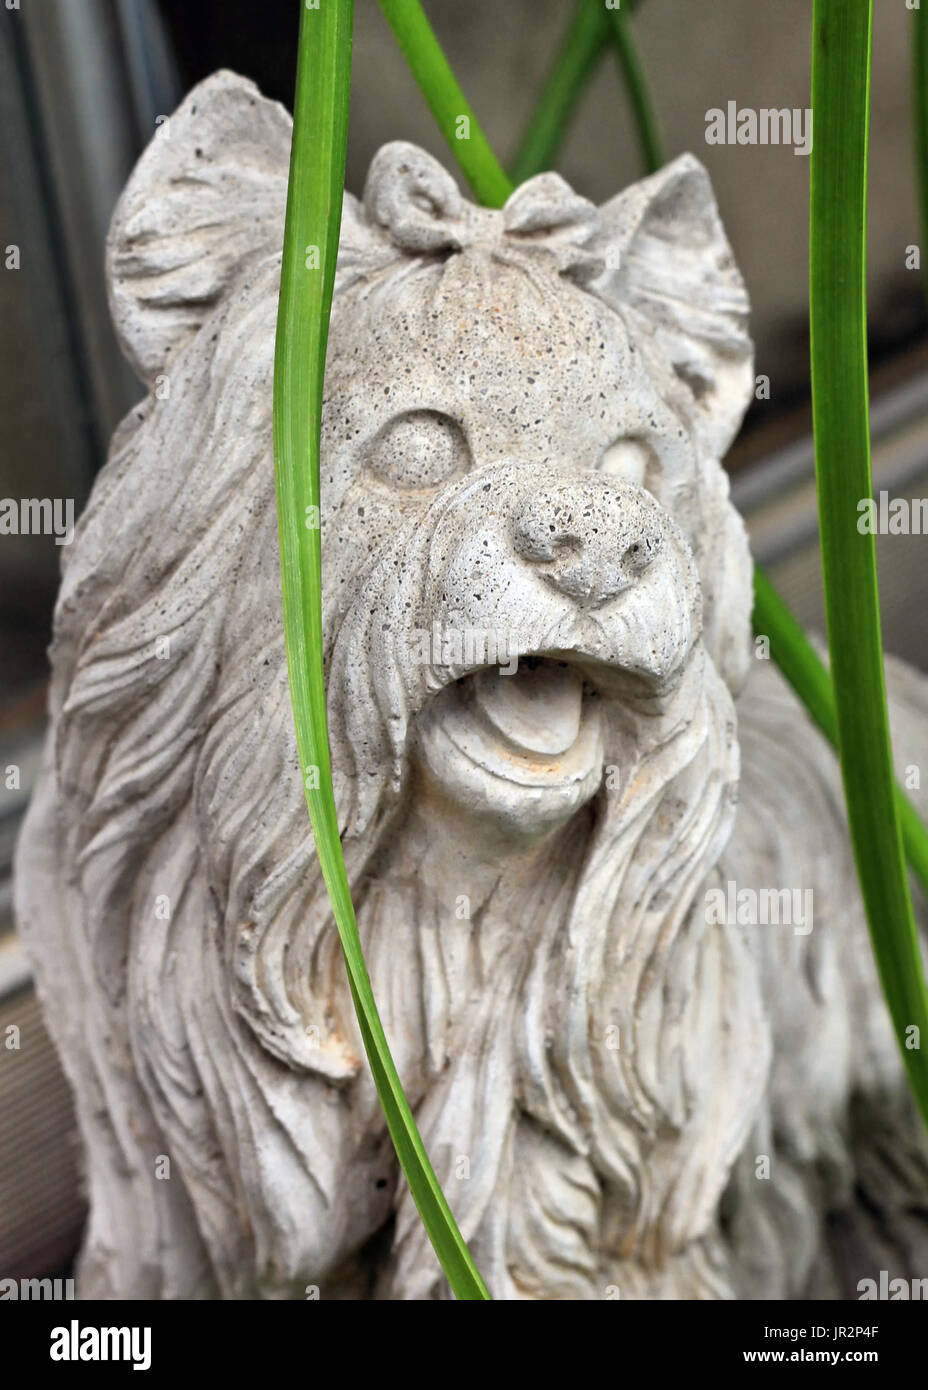 A cement statue of Silky or Yorkshire Terrier is viewed close up. Stock Photo